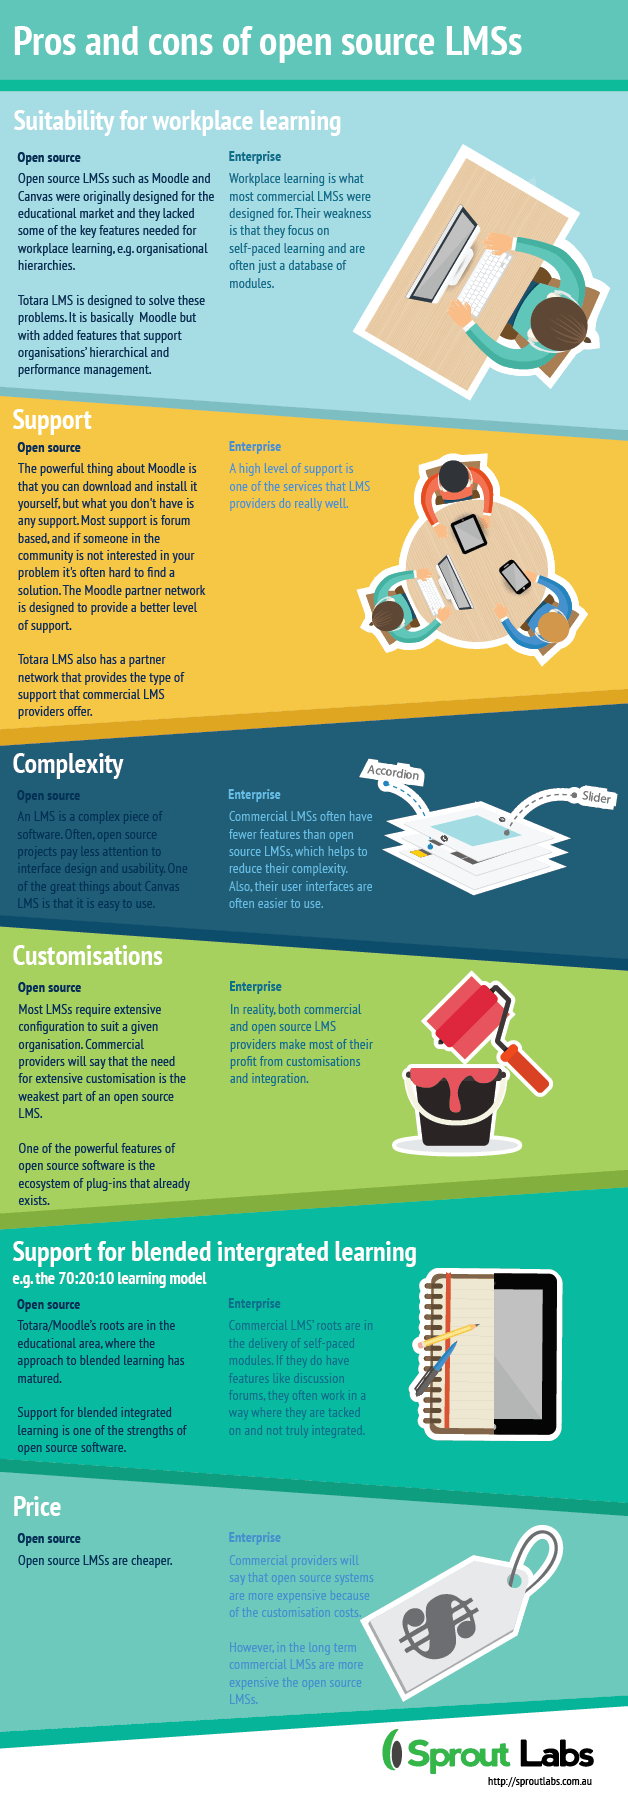 The Pros and Cons of Open Source LMSs Infographic